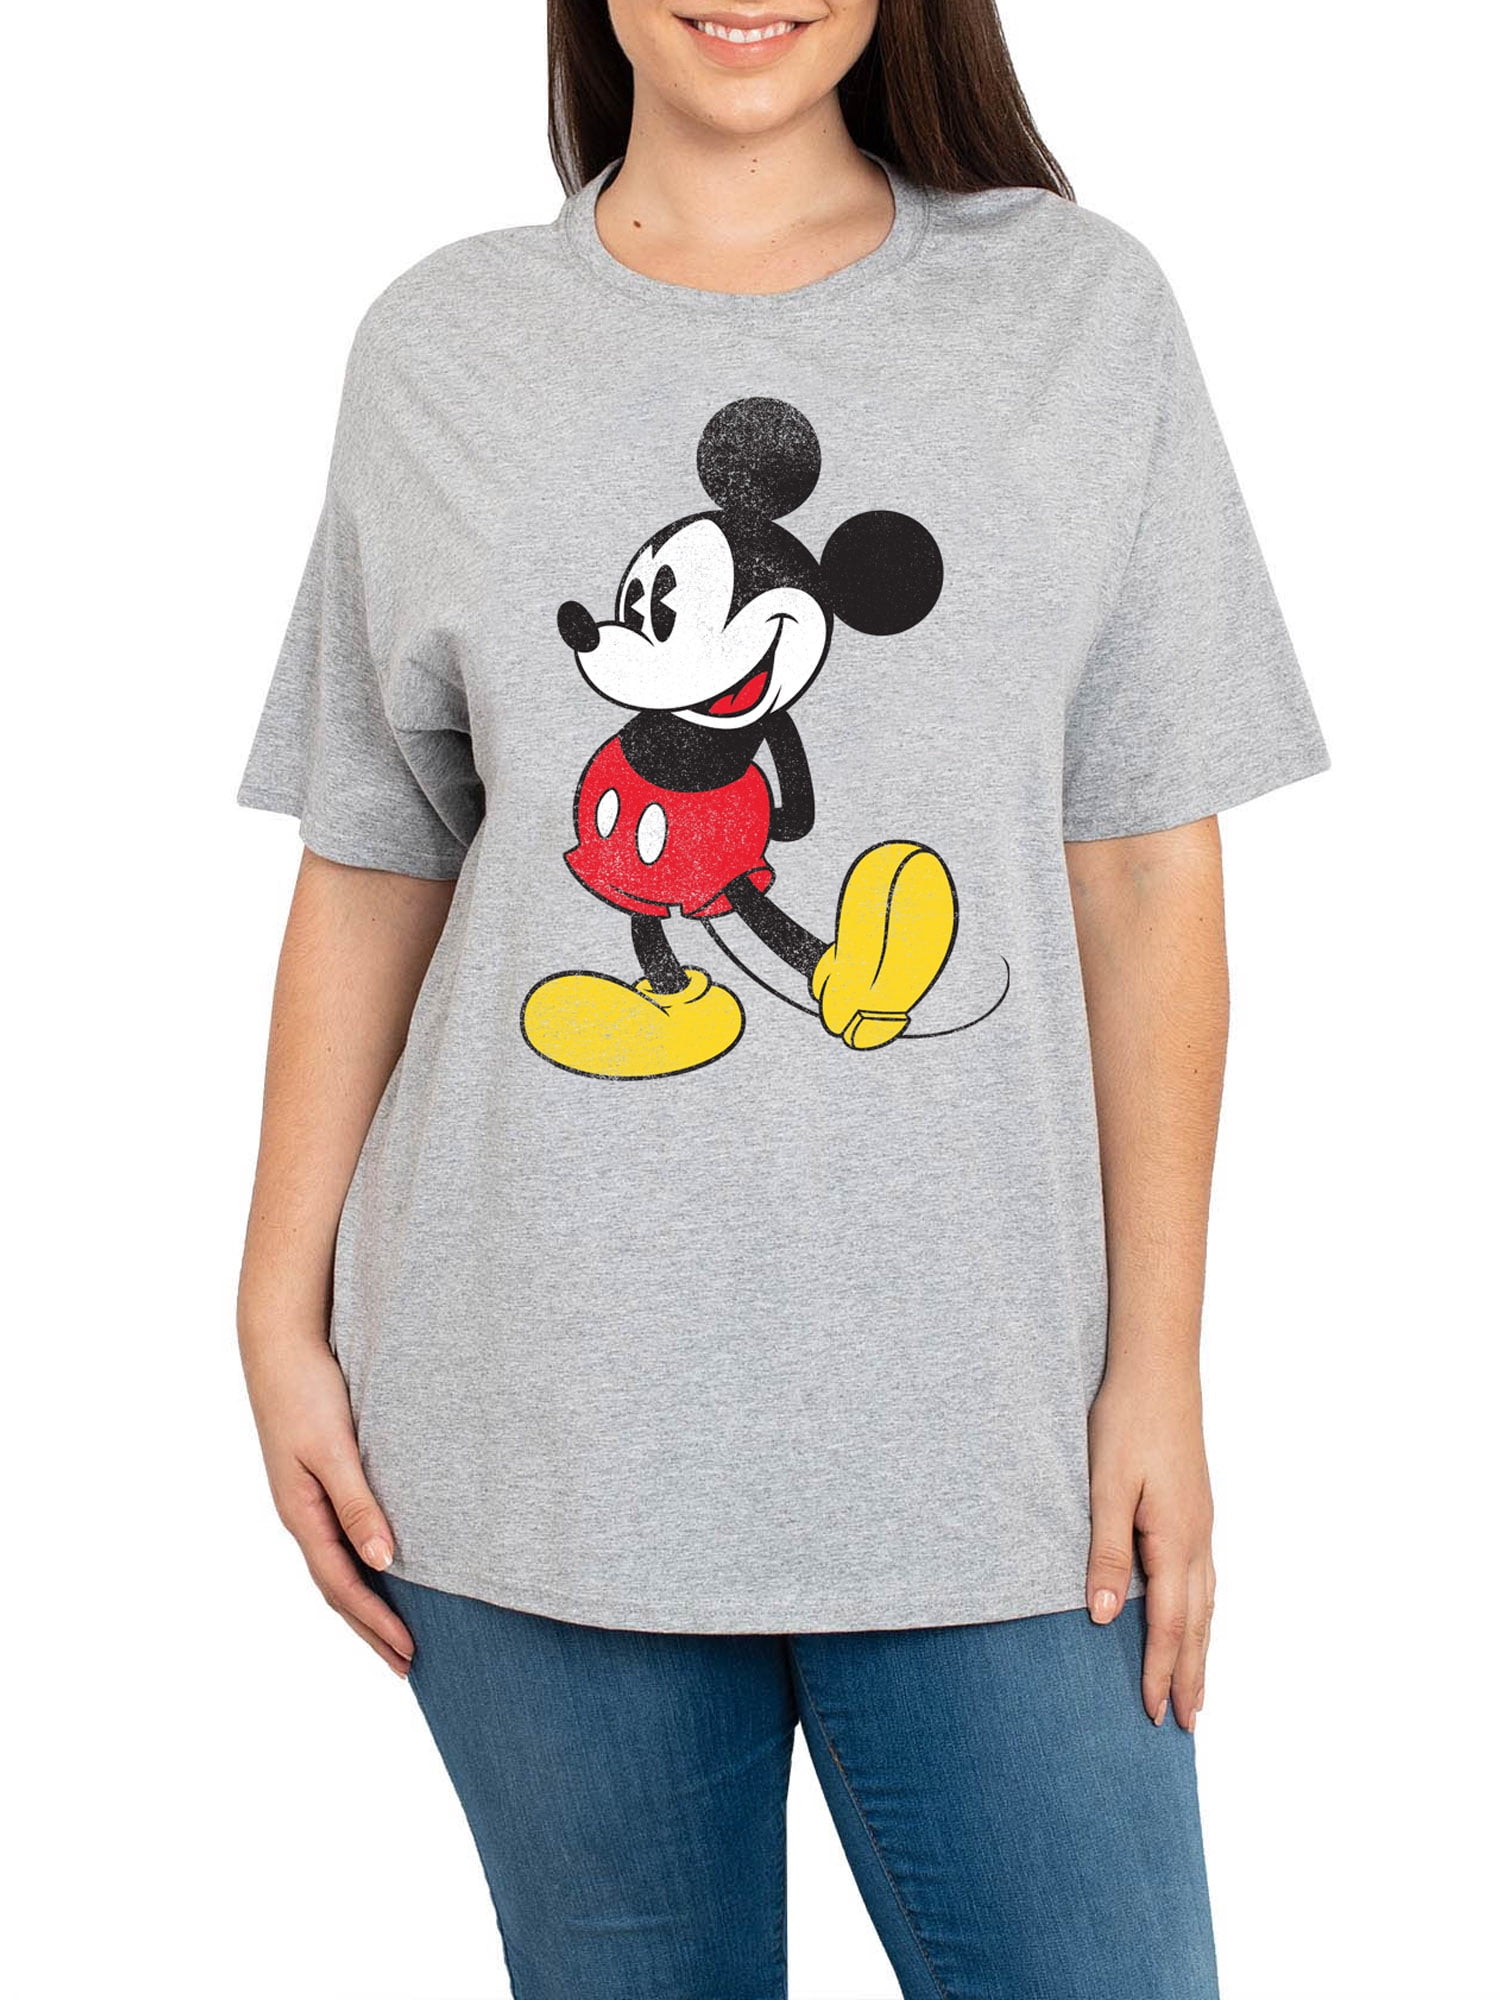 Official Disney Mickey Mouse  2020 100% Cotton WHITE ADULT T-Shirt Sz LARGE NWT! 